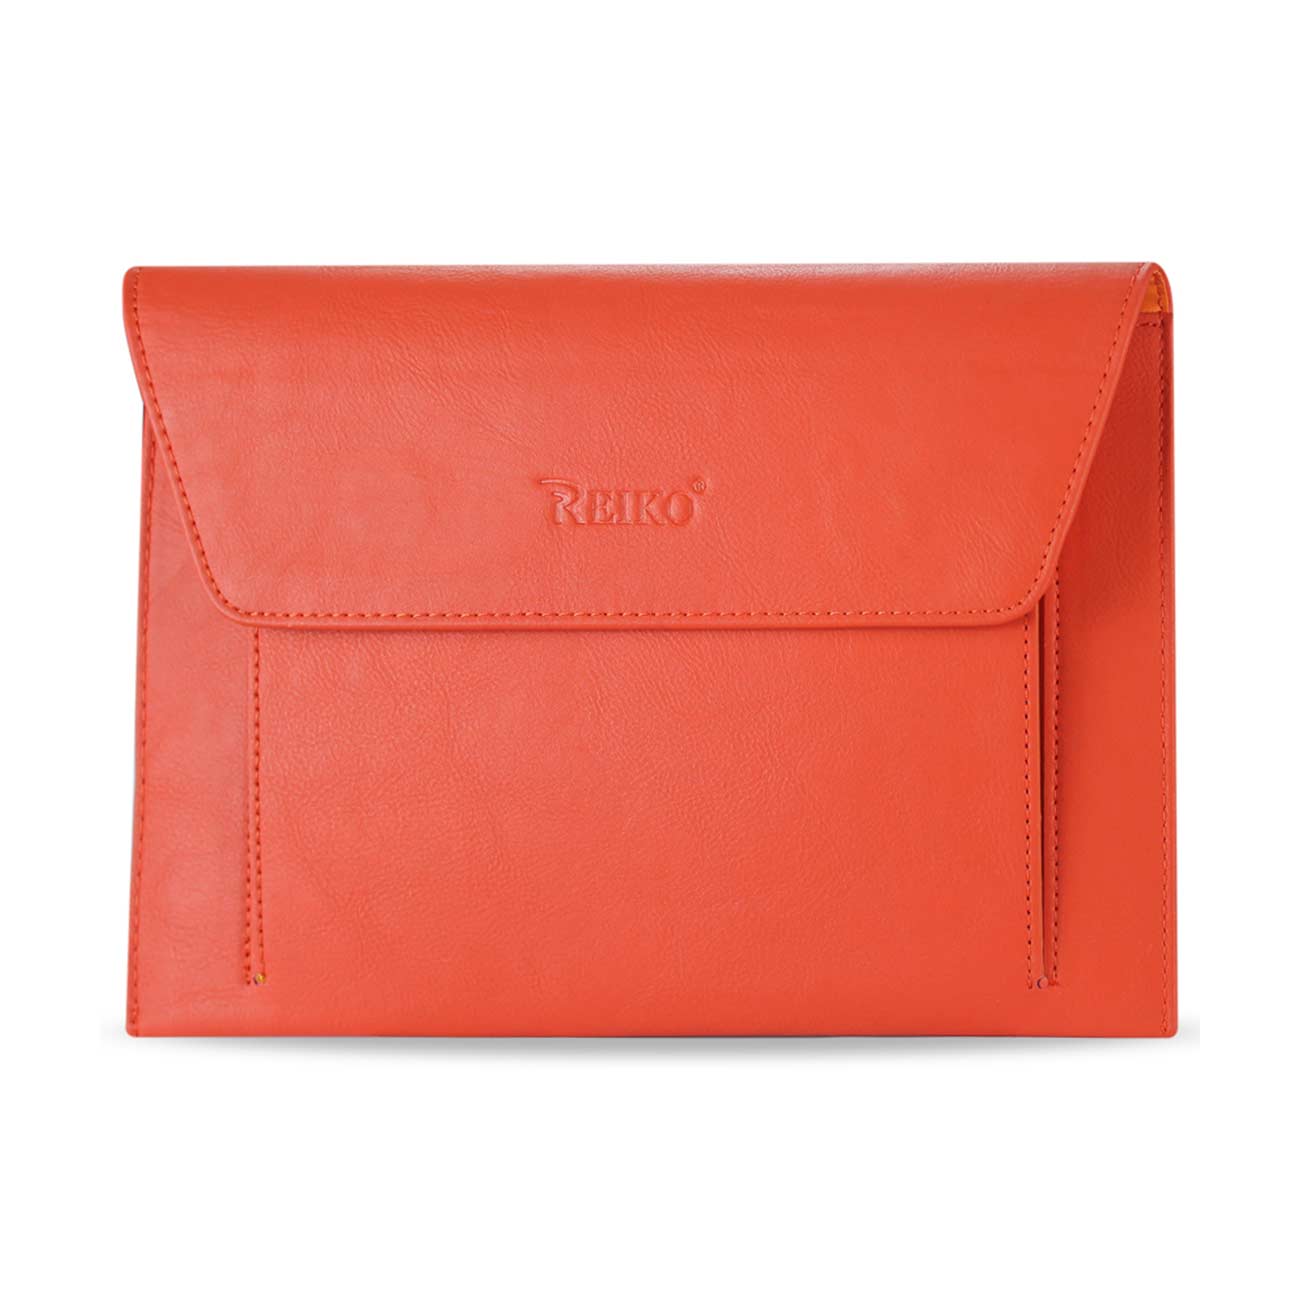 REIKO PREMIUM LEATHER CASE POUCH FOR 10.1INCHES IPADS AND TABLETS In ORANGE